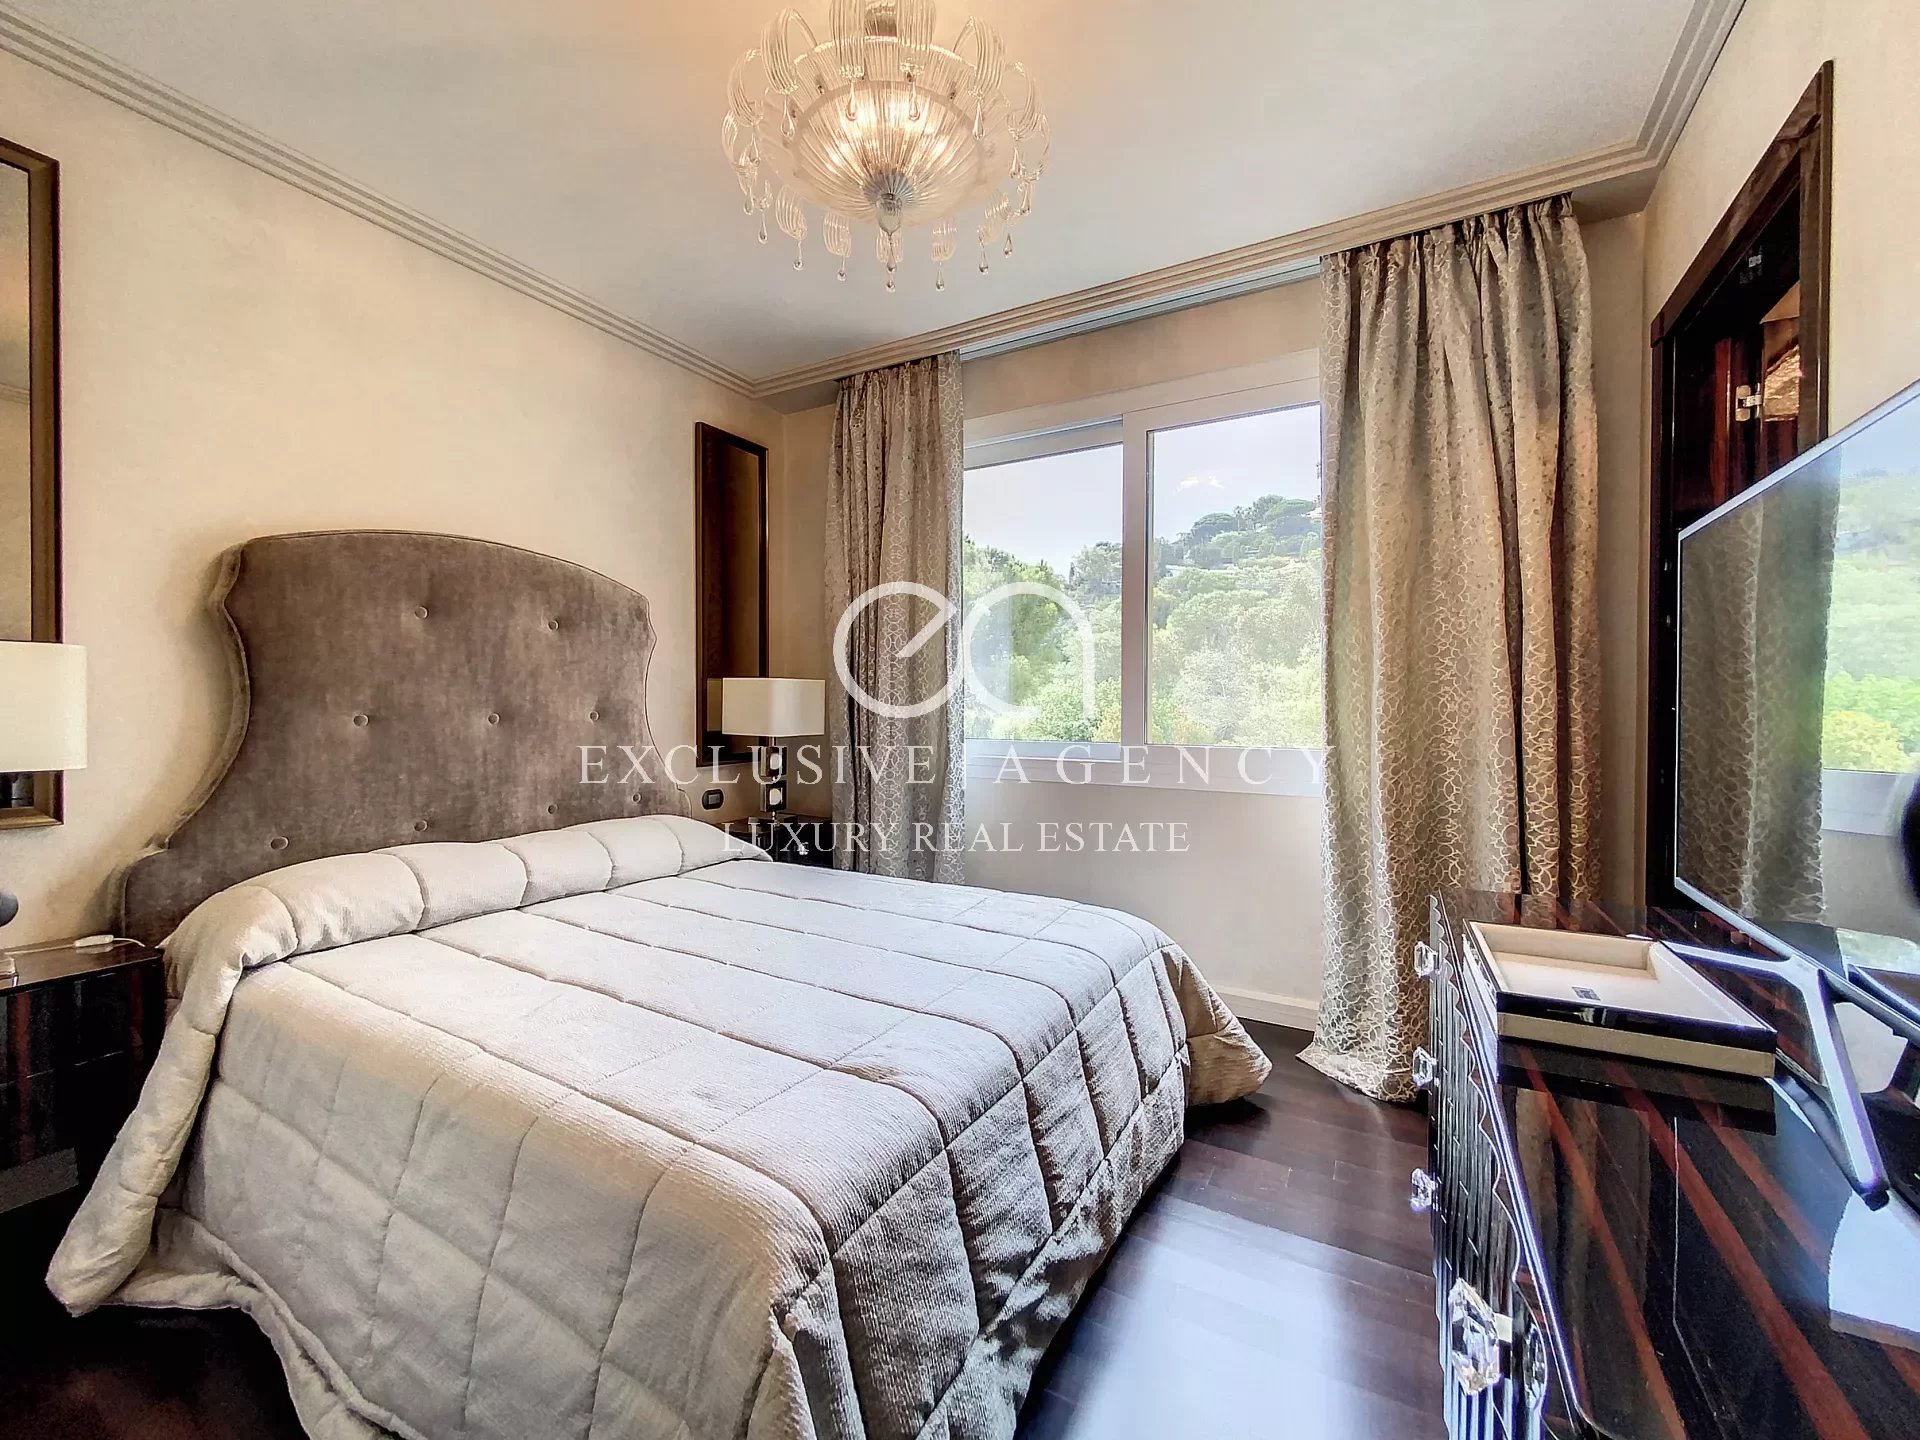 Cannes California flat of 165m2 of prestige with noble materials